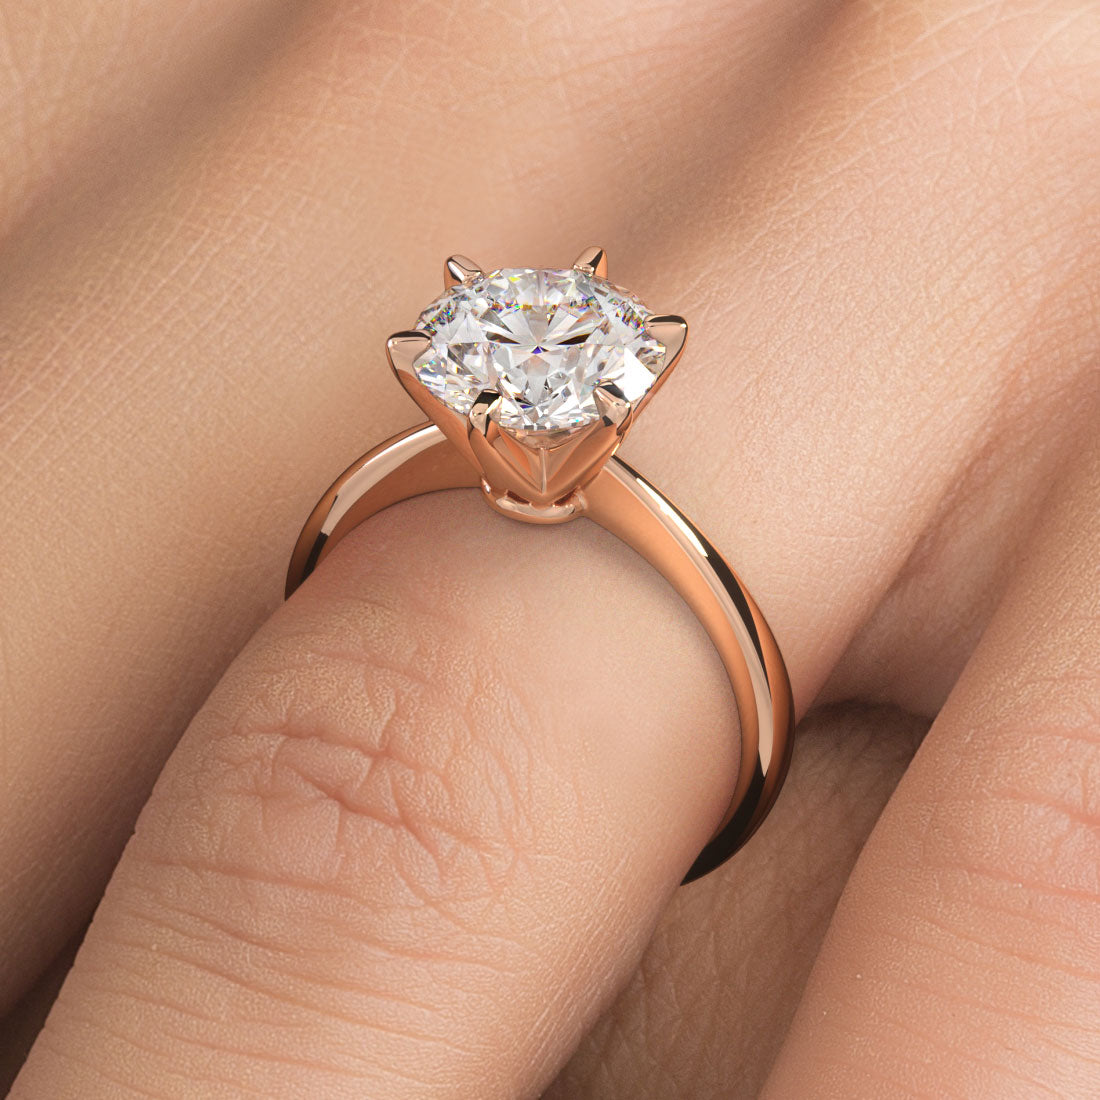 3.14ct GIA Certified F-VS1 Round Brilliant Petite Tapered 6 Prong Solitaire Lab Grown Diamond Engagement Ring set in 14k rose Gold